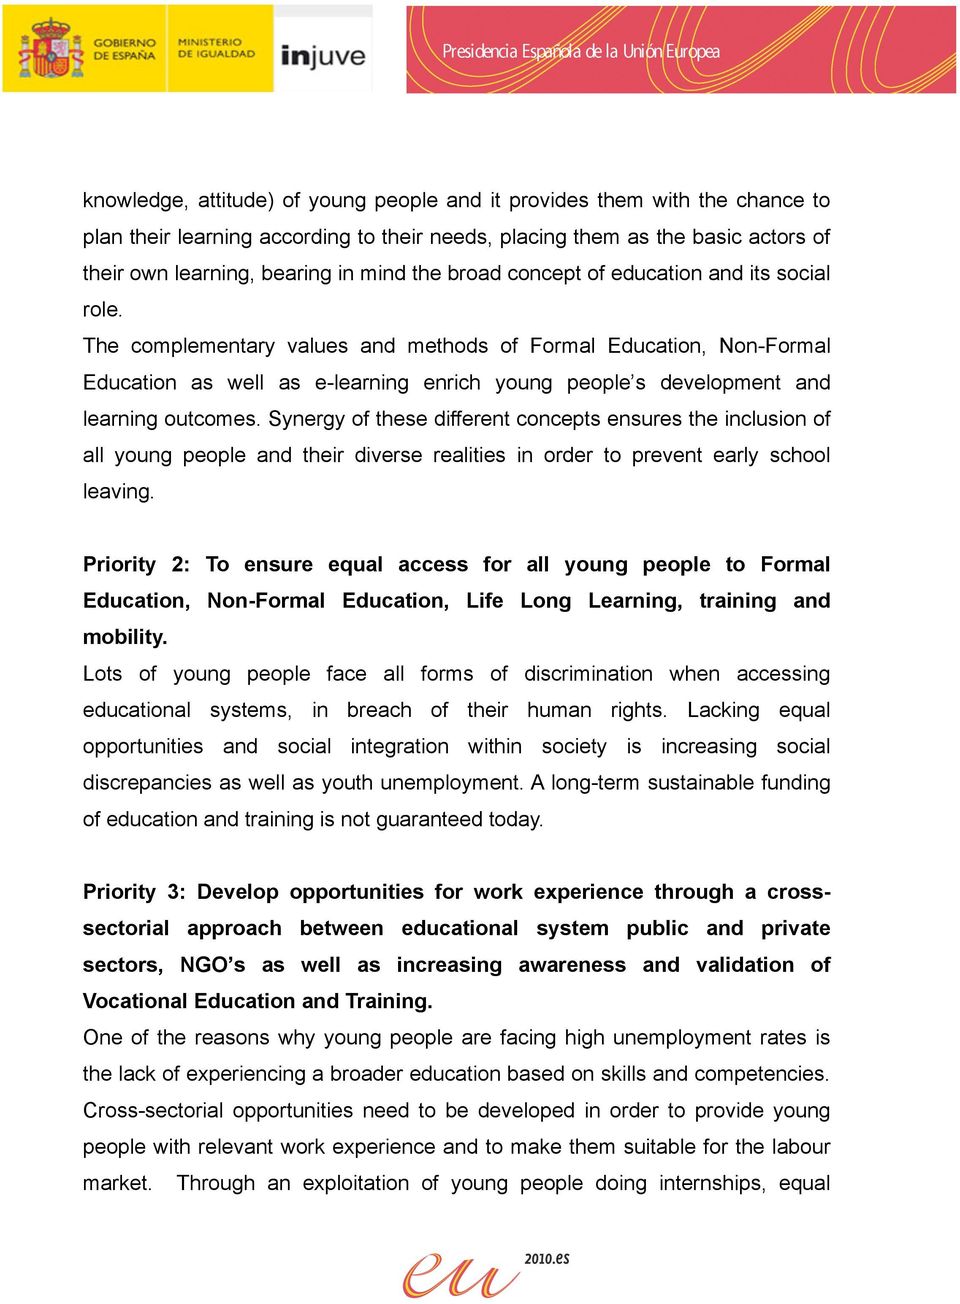 The complementary values and methods of Formal Education, Non-Formal Education as well as e-learning enrich young people s development and learning outcomes.